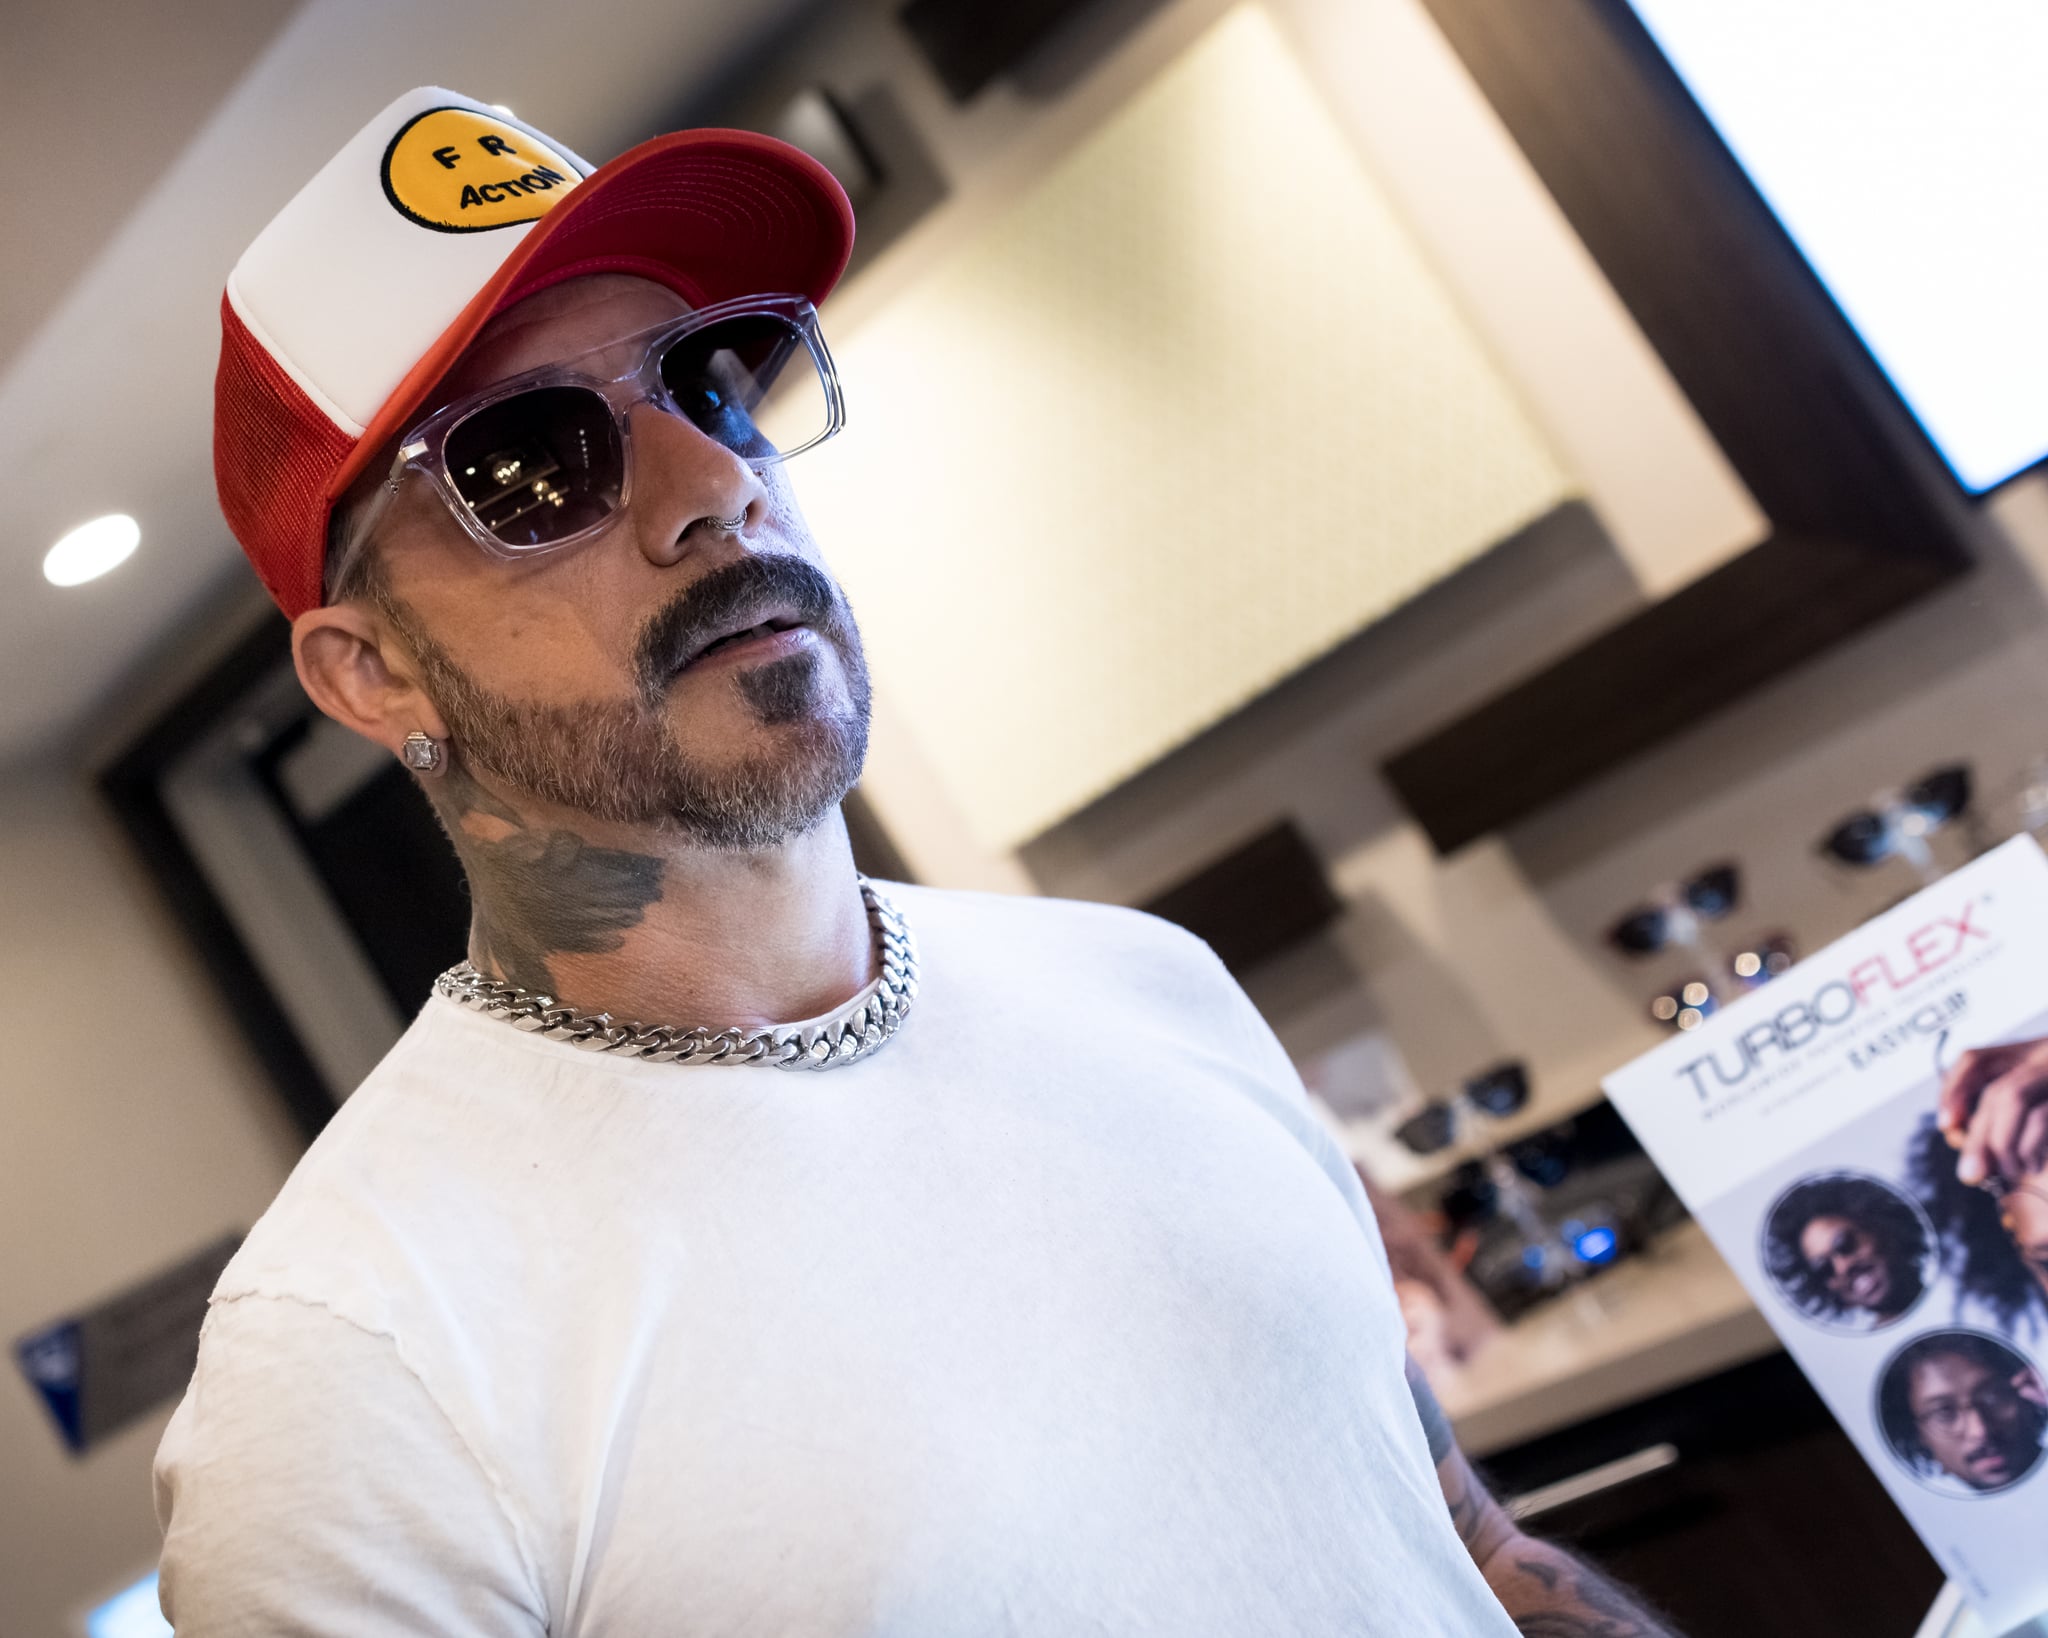 LAS VEGAS, NEVADA - MARCH 31: Backstreet Boys bandmember AJ Mclean attends the official gift lounge presented by Míage Skincare during the 64th annual GRAMMY Awards at Topgolf Las Vegas on March 31, 2022 in Las Vegas, Nevada. (Photo by Greg Doherty/Getty Images for The Recording Academy)